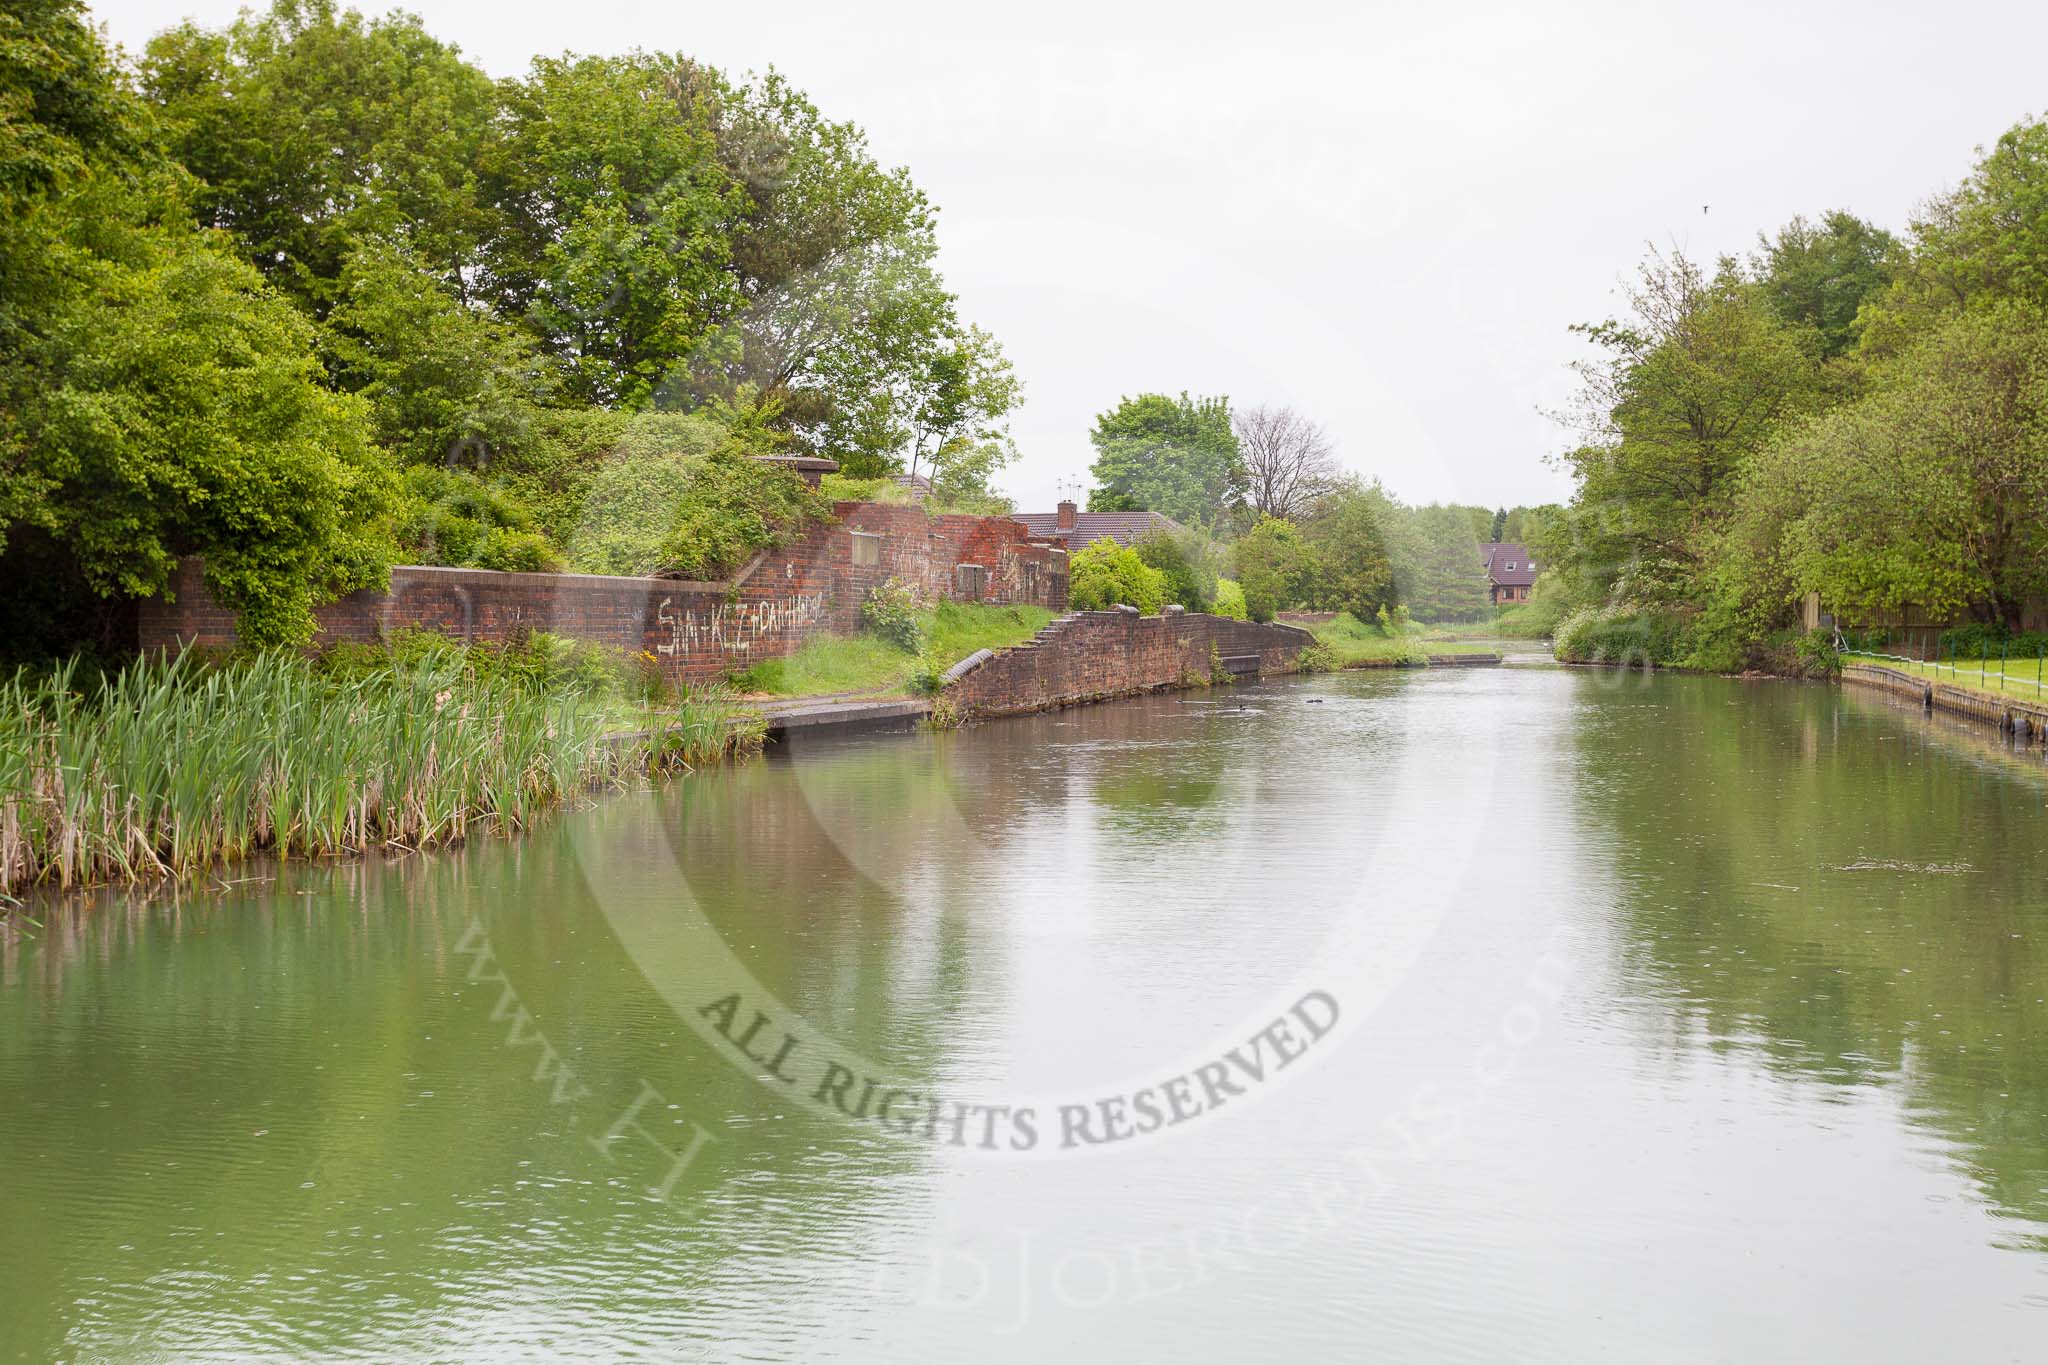 BCN 24h Marathon Challenge 2015: Two former basins on the left once served Capponfield Iron Works. Ahead is Capponfield Stop on the Bradley Branch.
Birmingham Canal Navigations,



on 24 May 2015 at 09:28, image #183